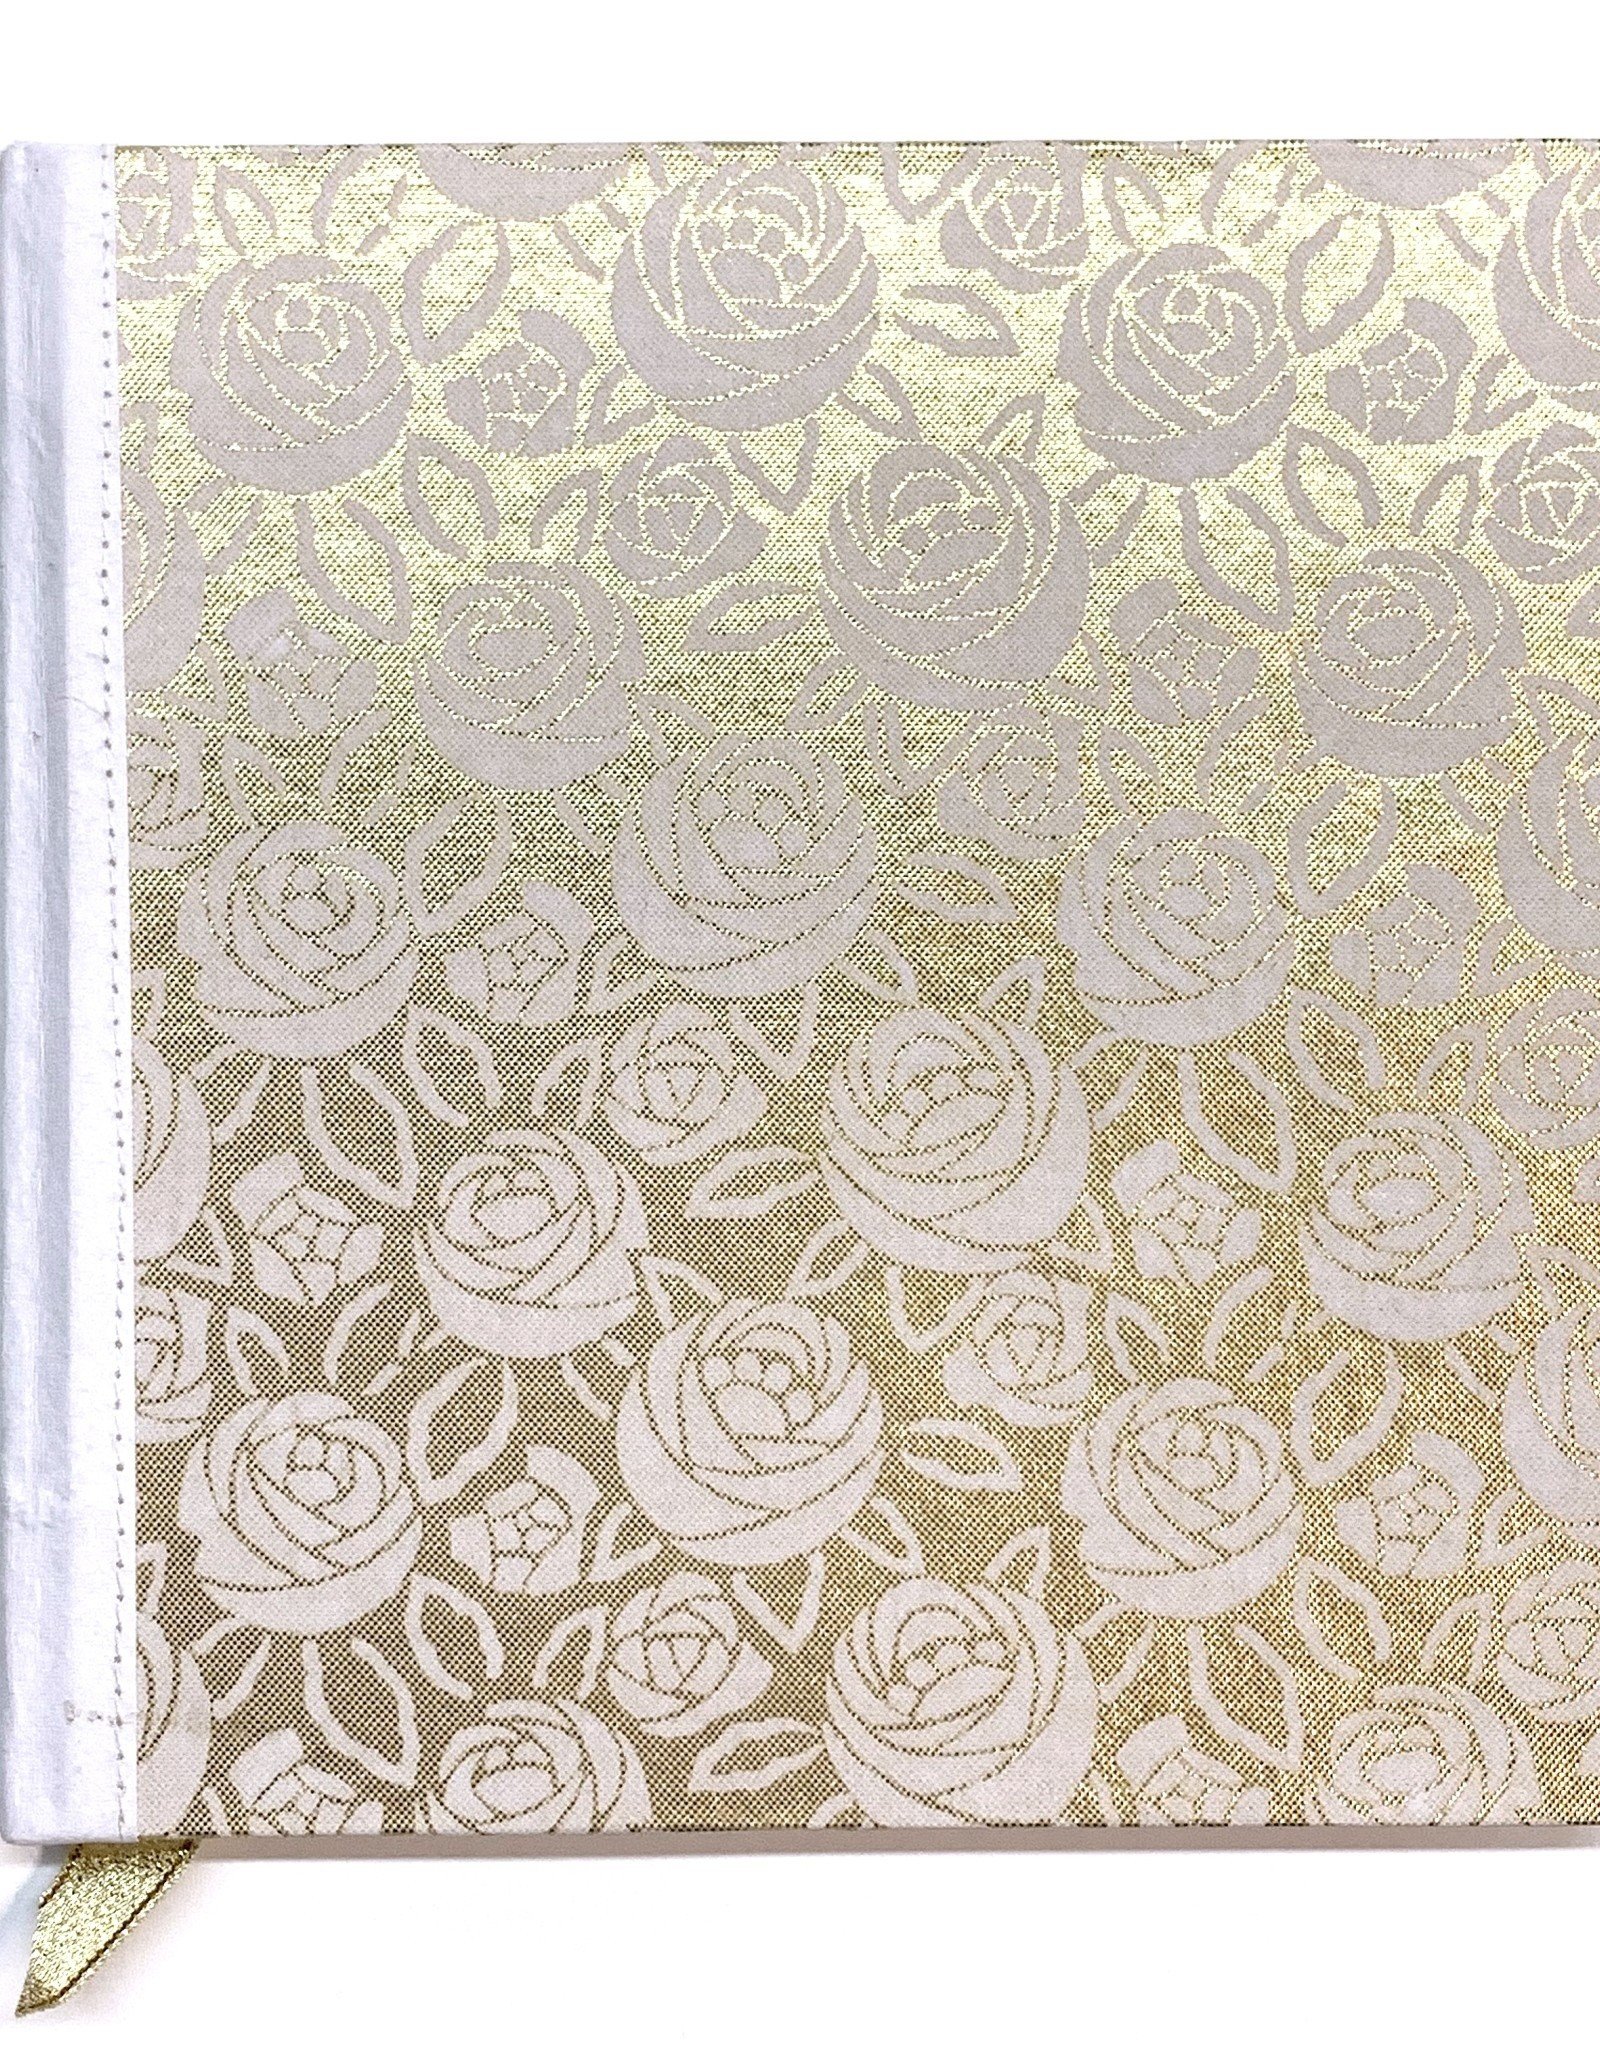 Indian Decorative Journal, White Roses on Gold, 7" x 7"